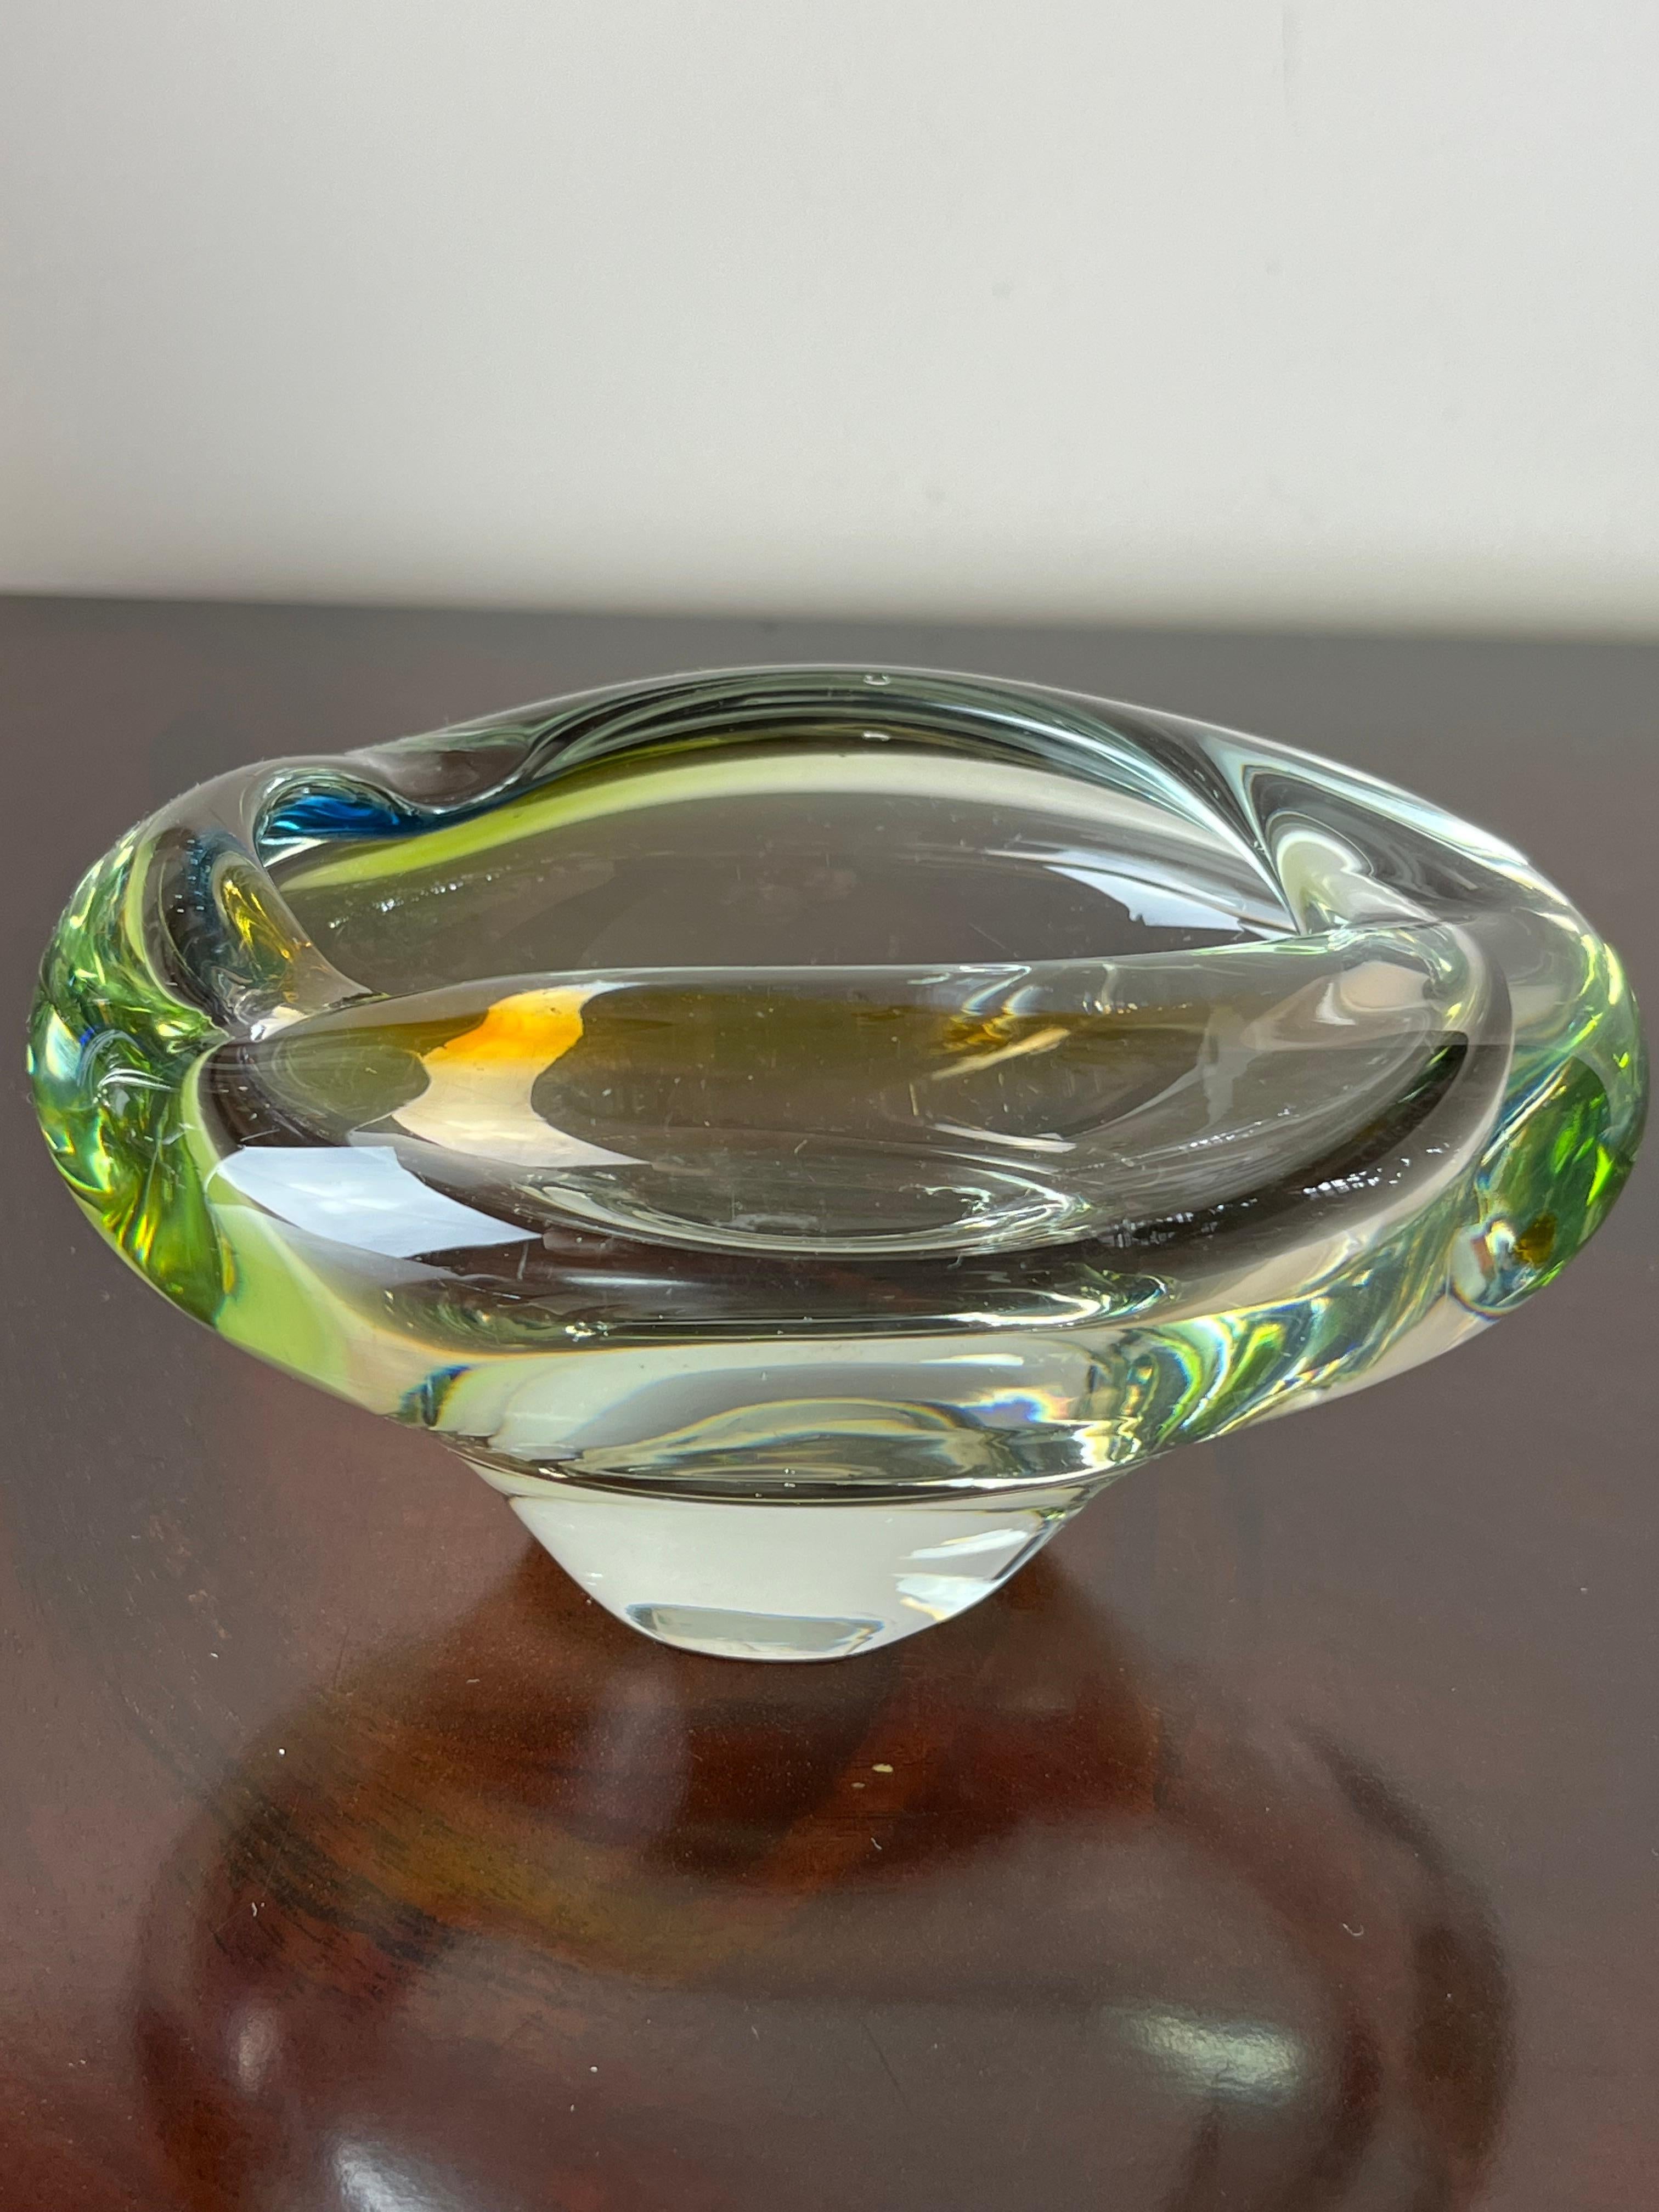 Murano glass ashtray, Italy, 1960s
Found in a noble apartment. It is intact and in good condition. You can observe small air bubbles inside the glass. This certifies the authenticity of an artisanal product, typical of glass handcrafted by Venetian